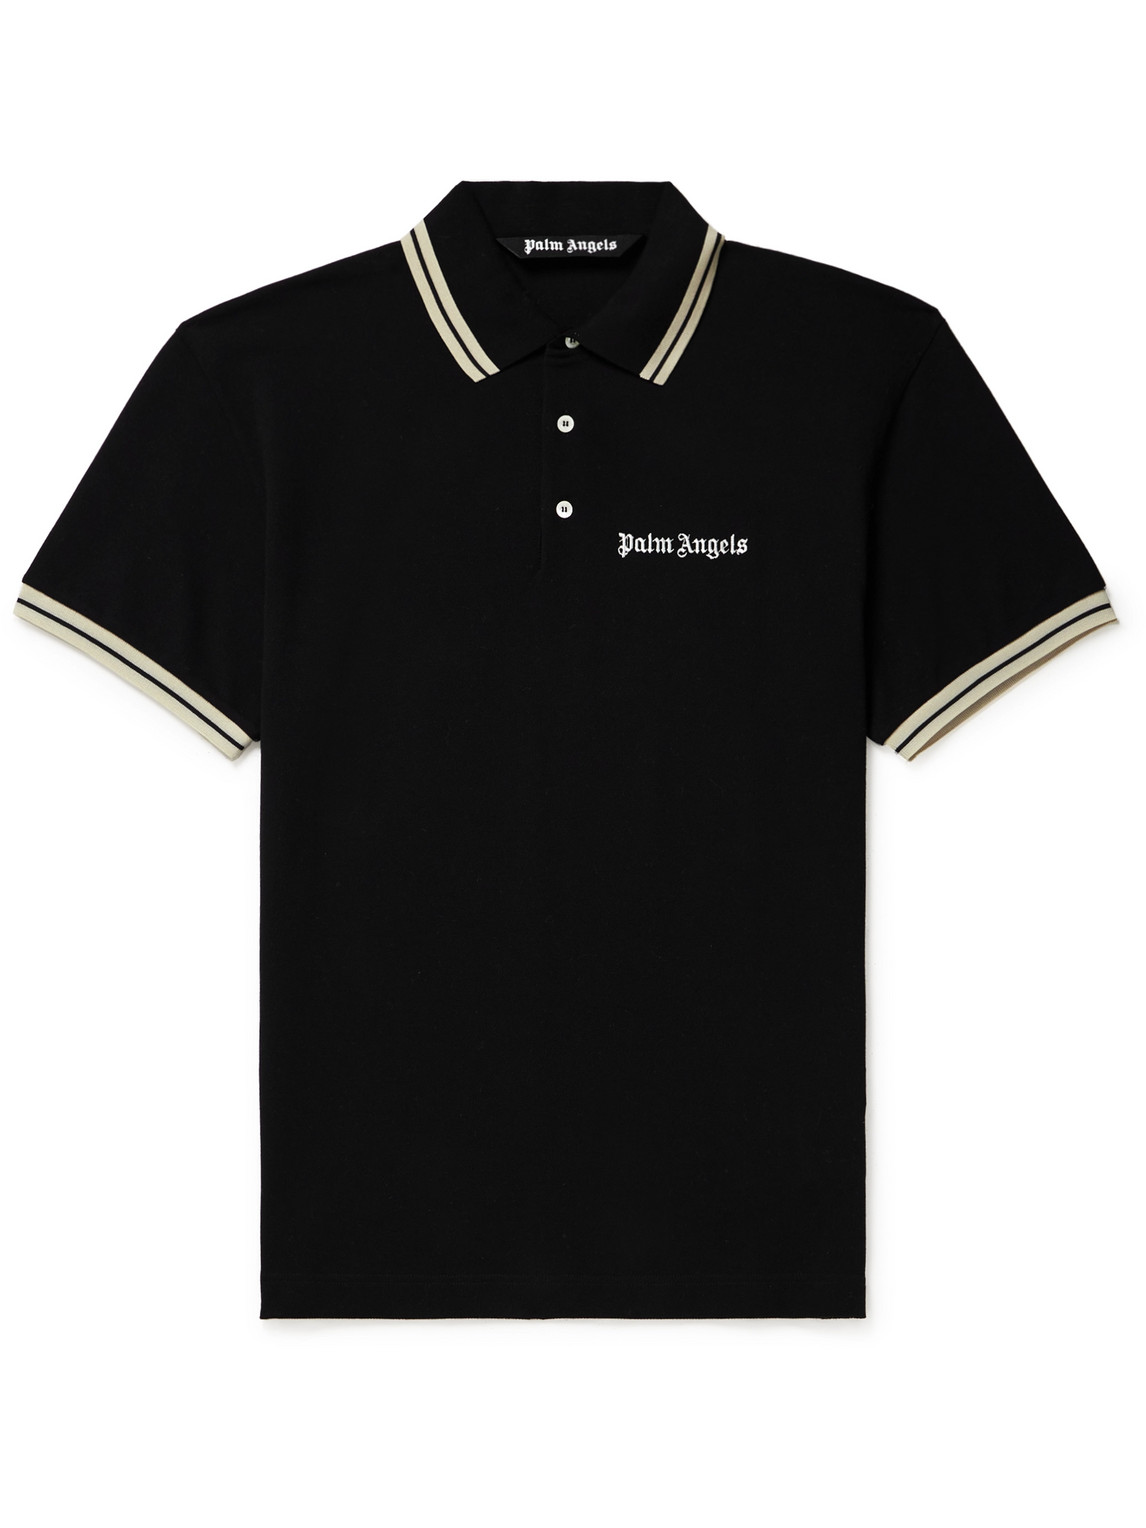 PALM ANGELS LOGO-EMBROIDERED COTTON-PIQUÉ POLO SHIRT